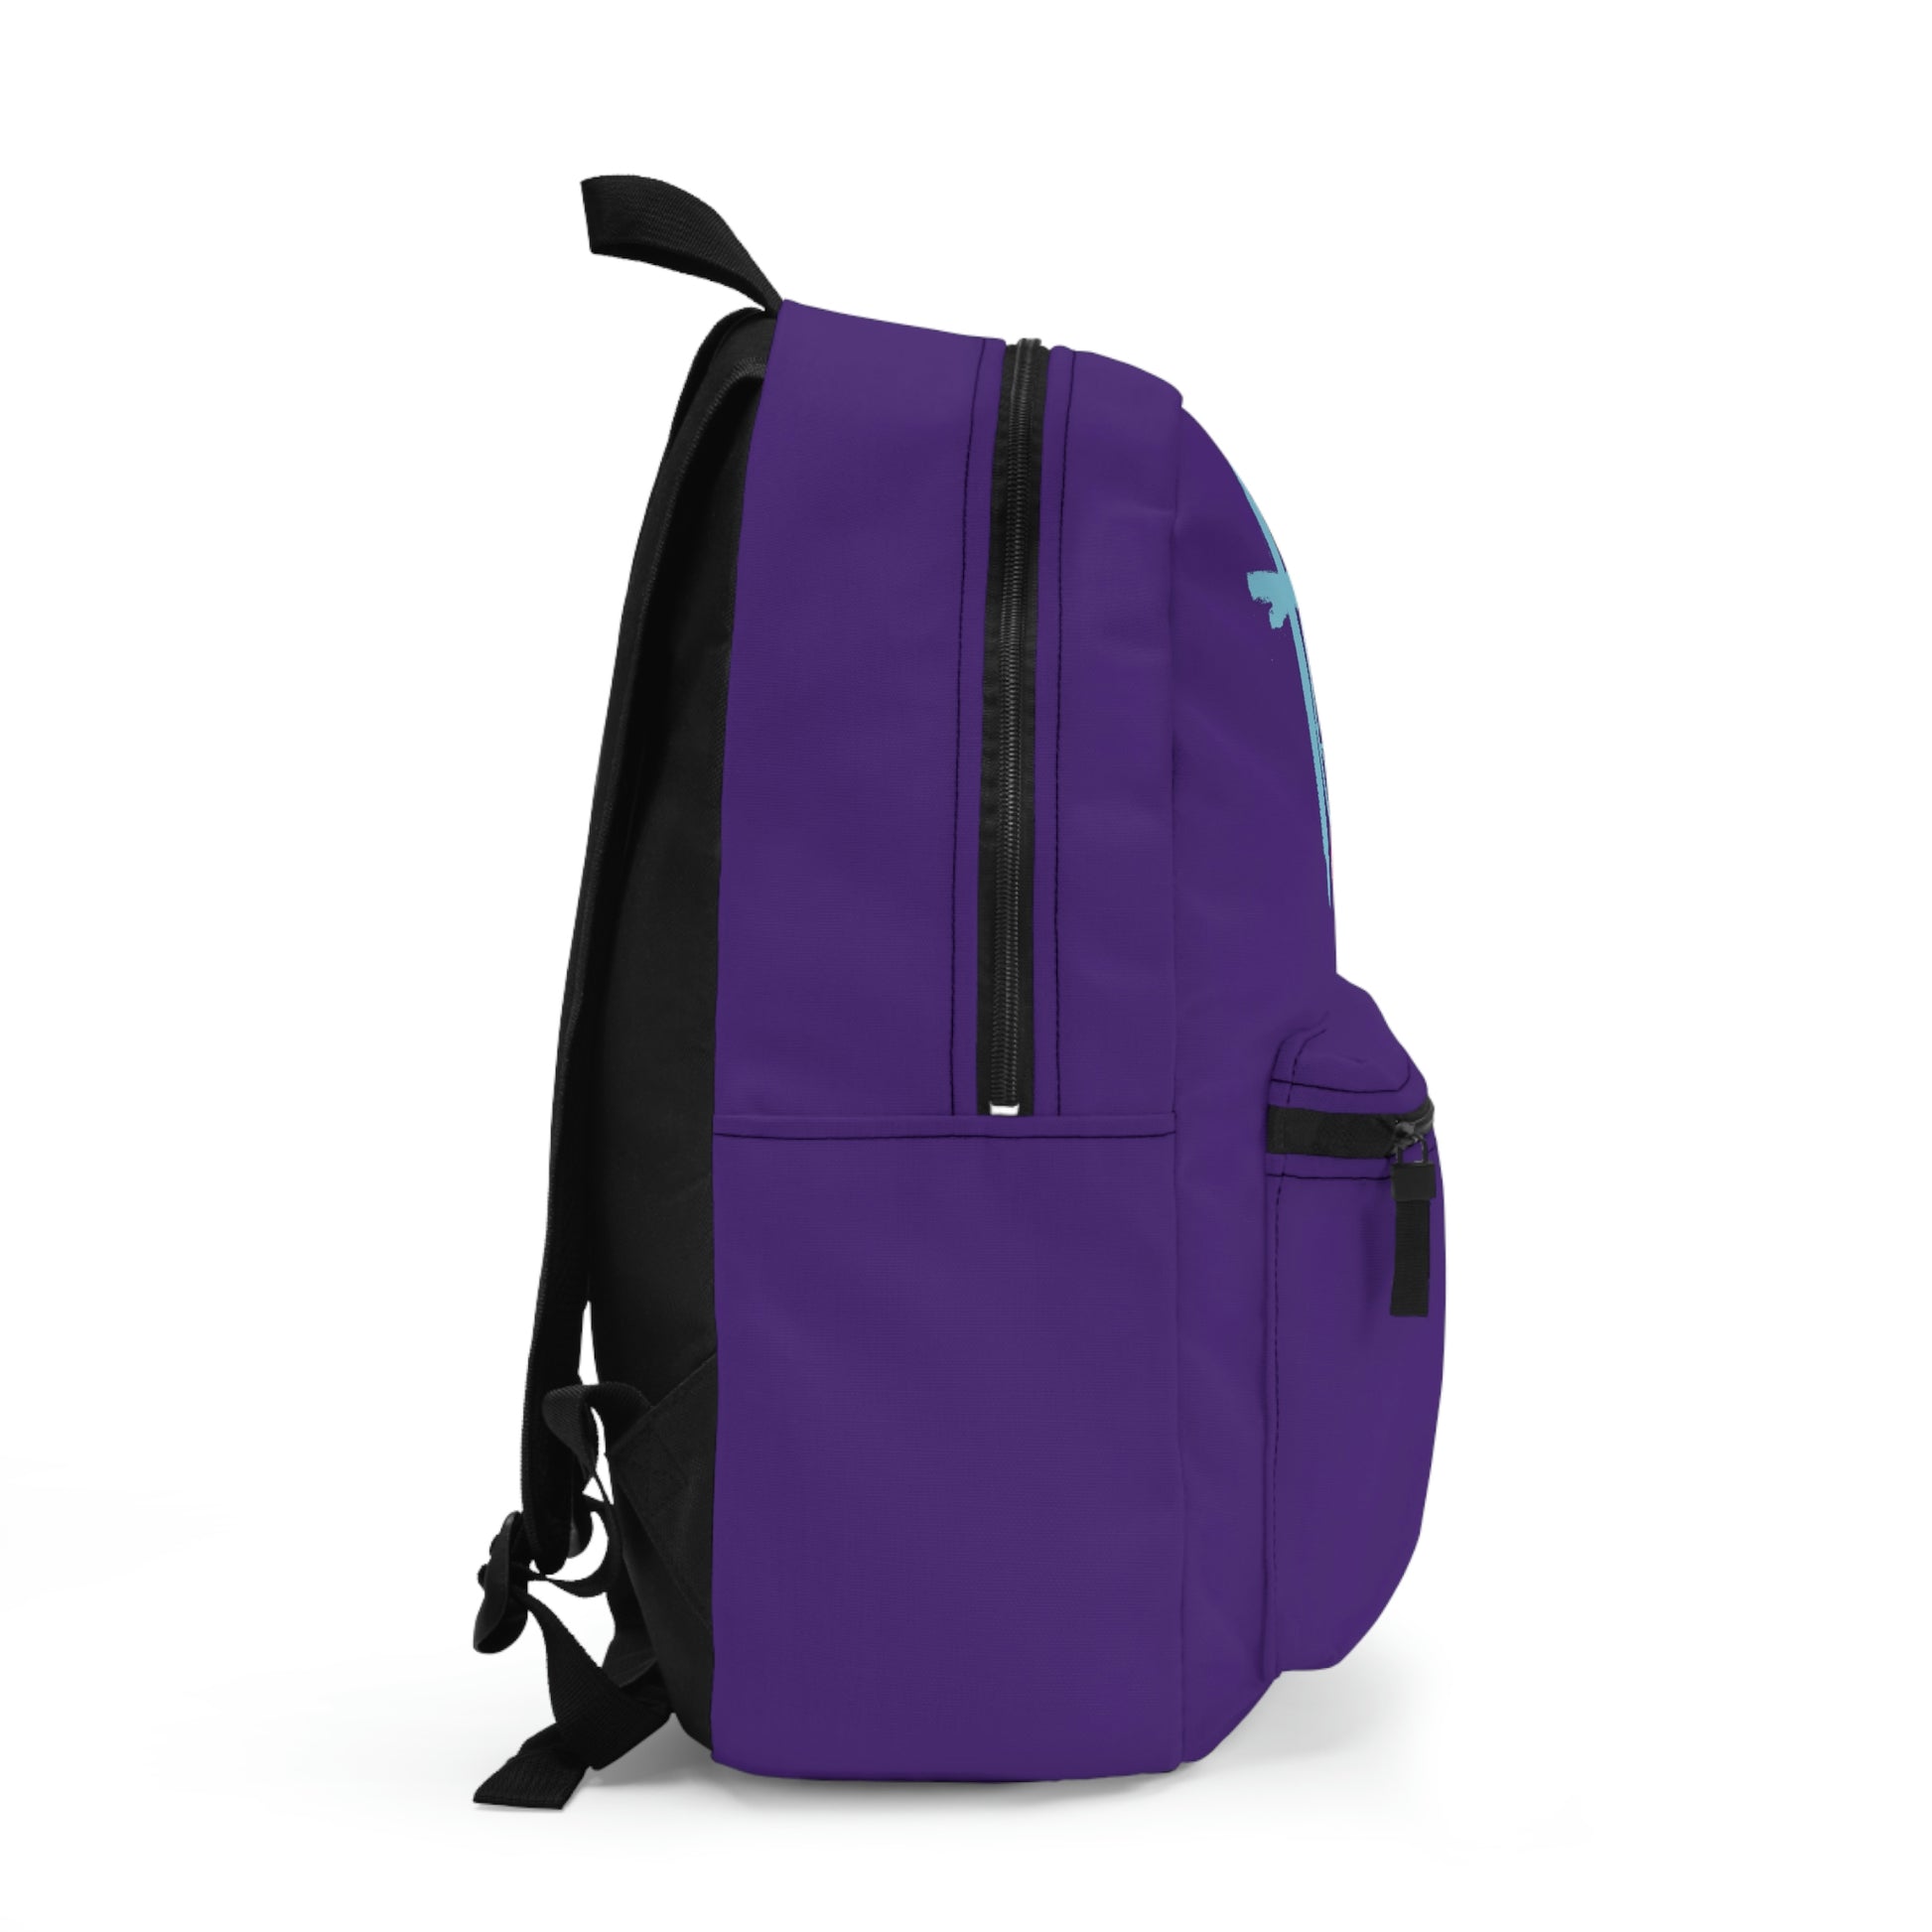 Condemned By Sin Freed By The Cross Backpack Printify